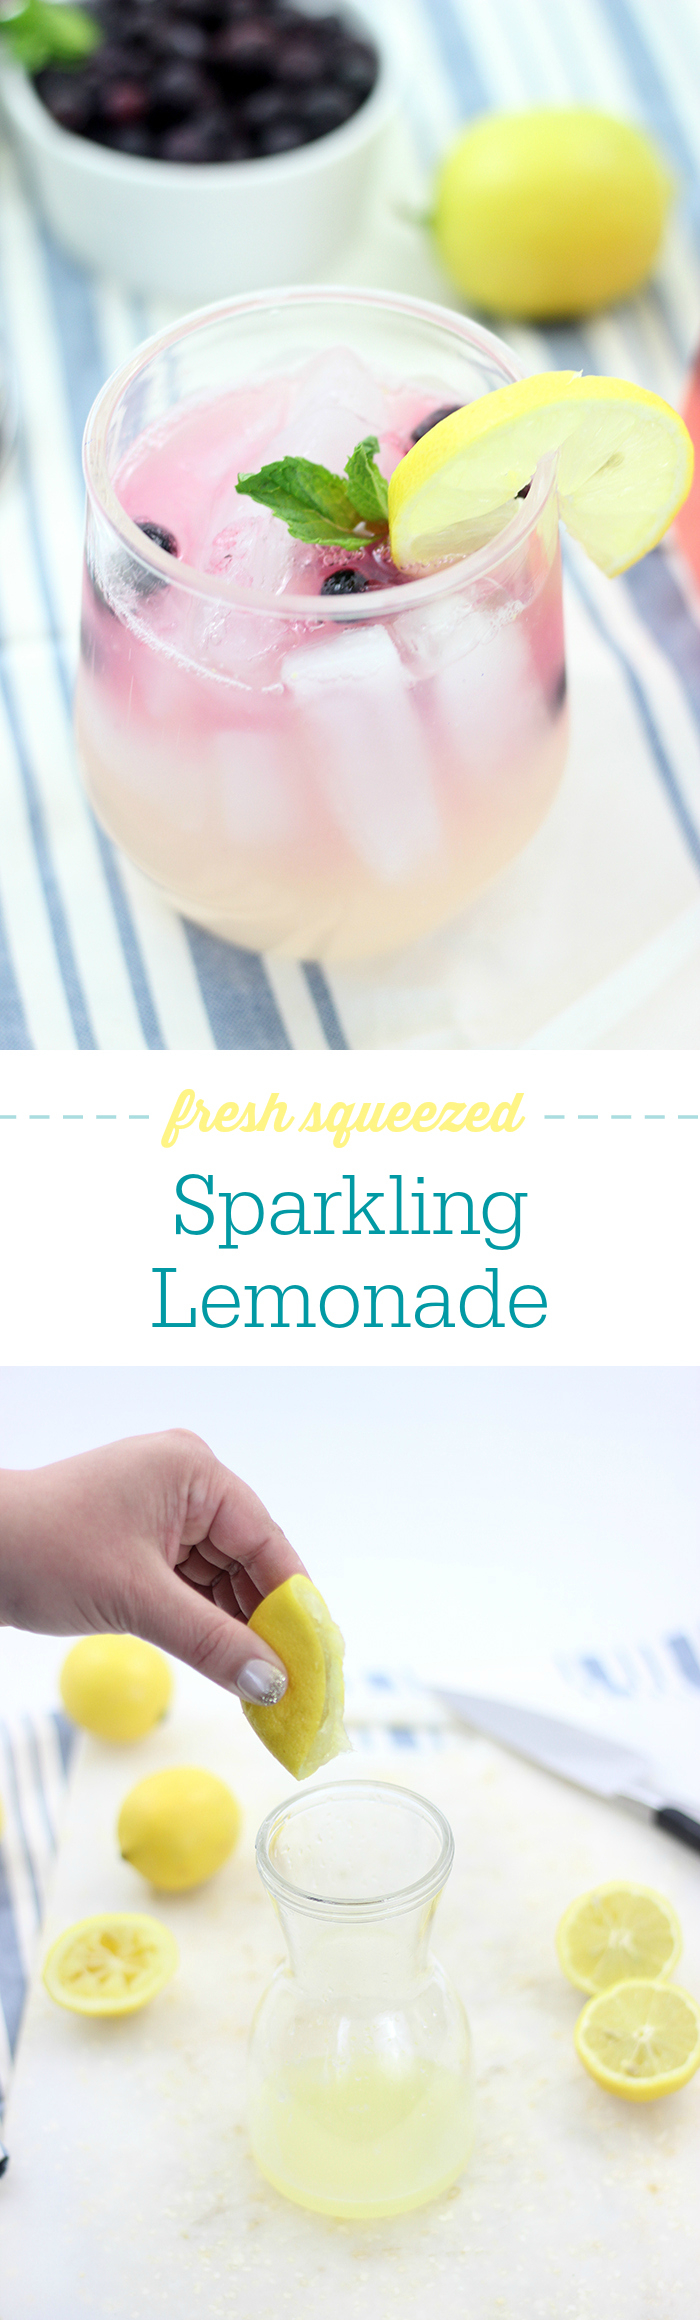 lighten up with this sparkling lemonade